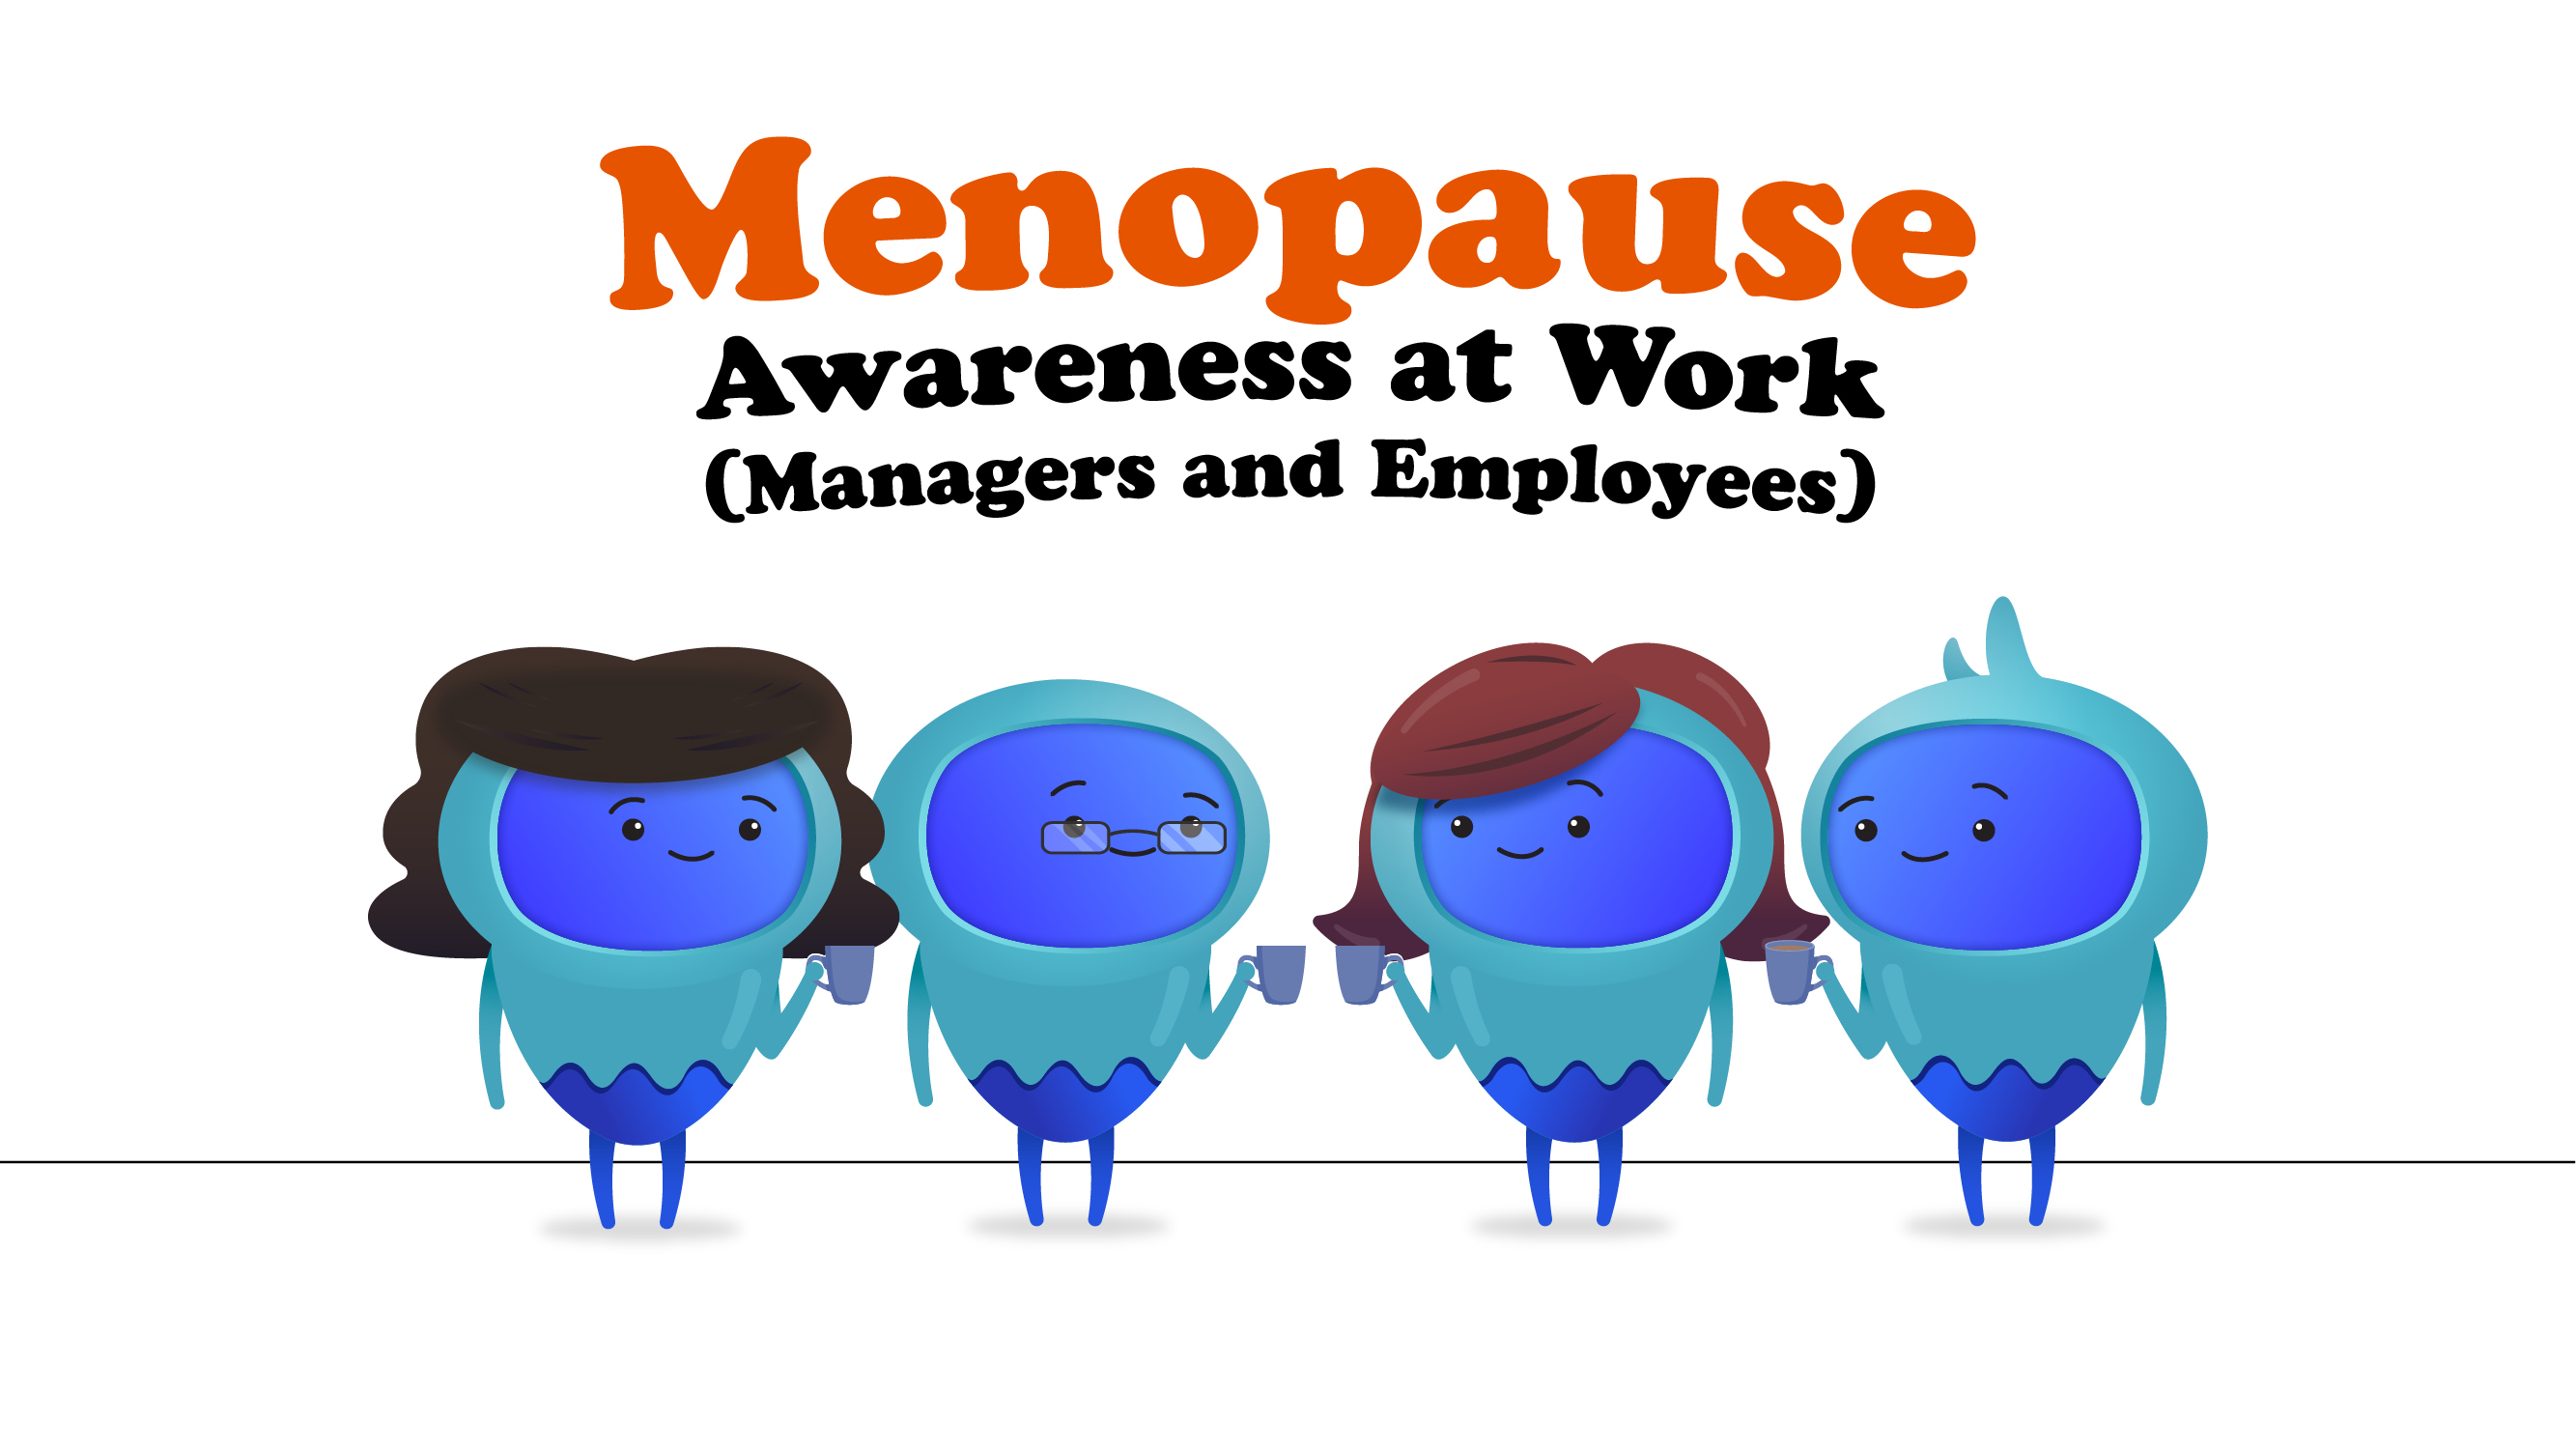 Menopause – Awareness at Work (Managers and Employees)